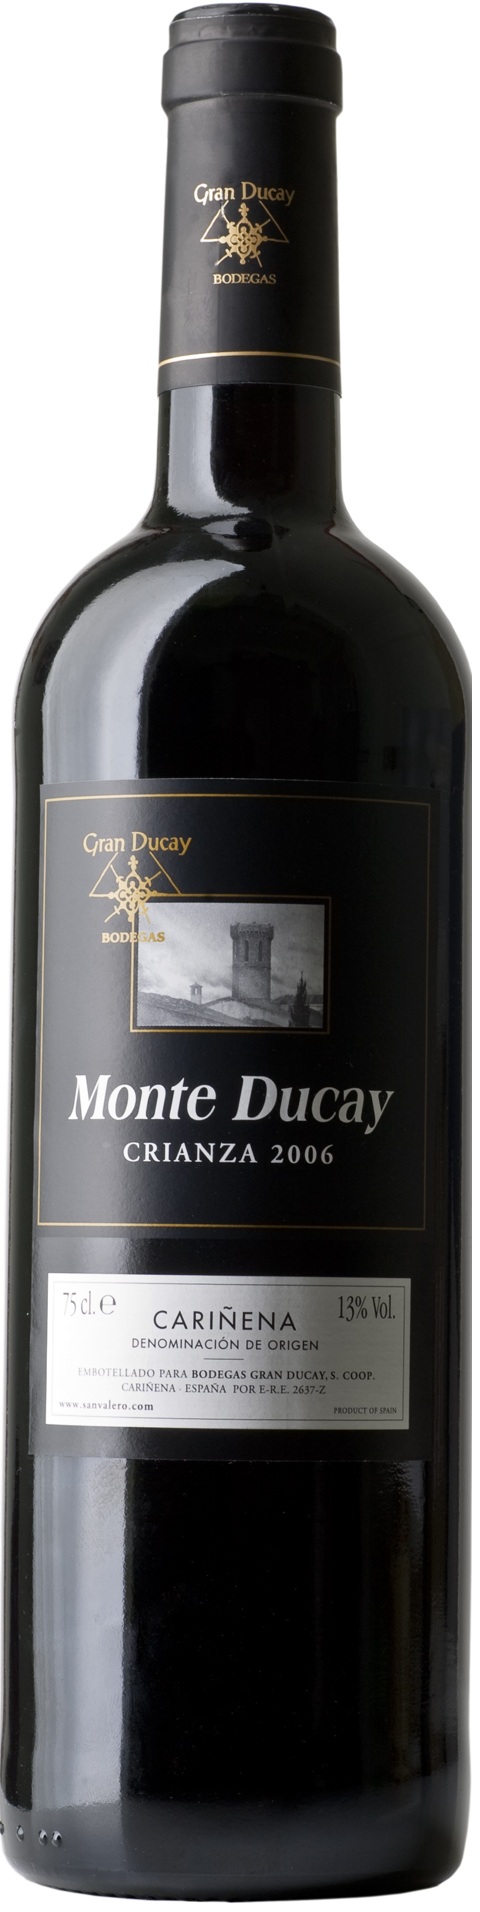 Image of Wine bottle Monte Ducay Tinto Crianza